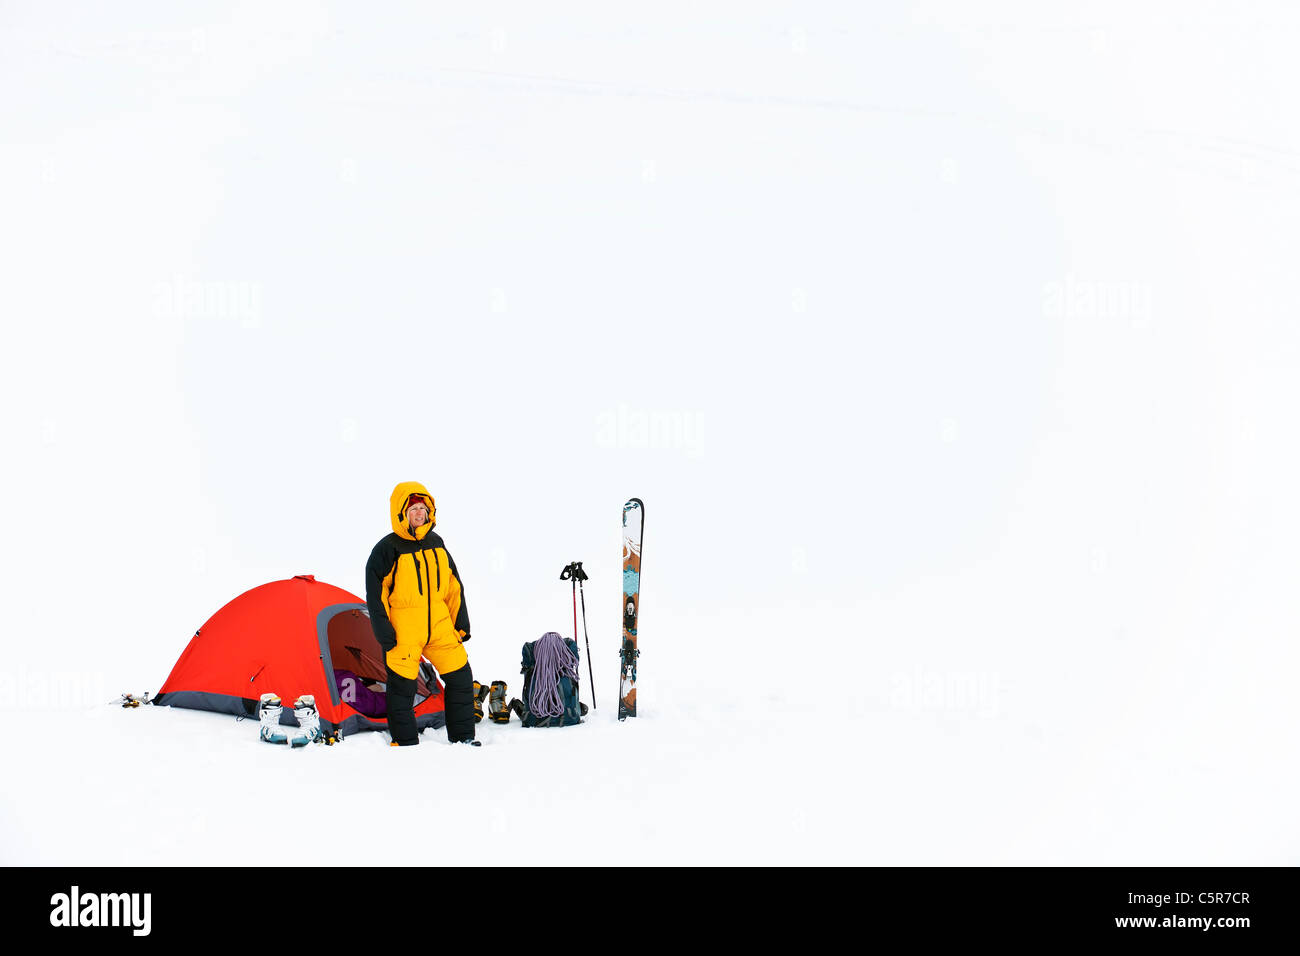 A mountaineer at base camp in a feather down suit. Stock Photo